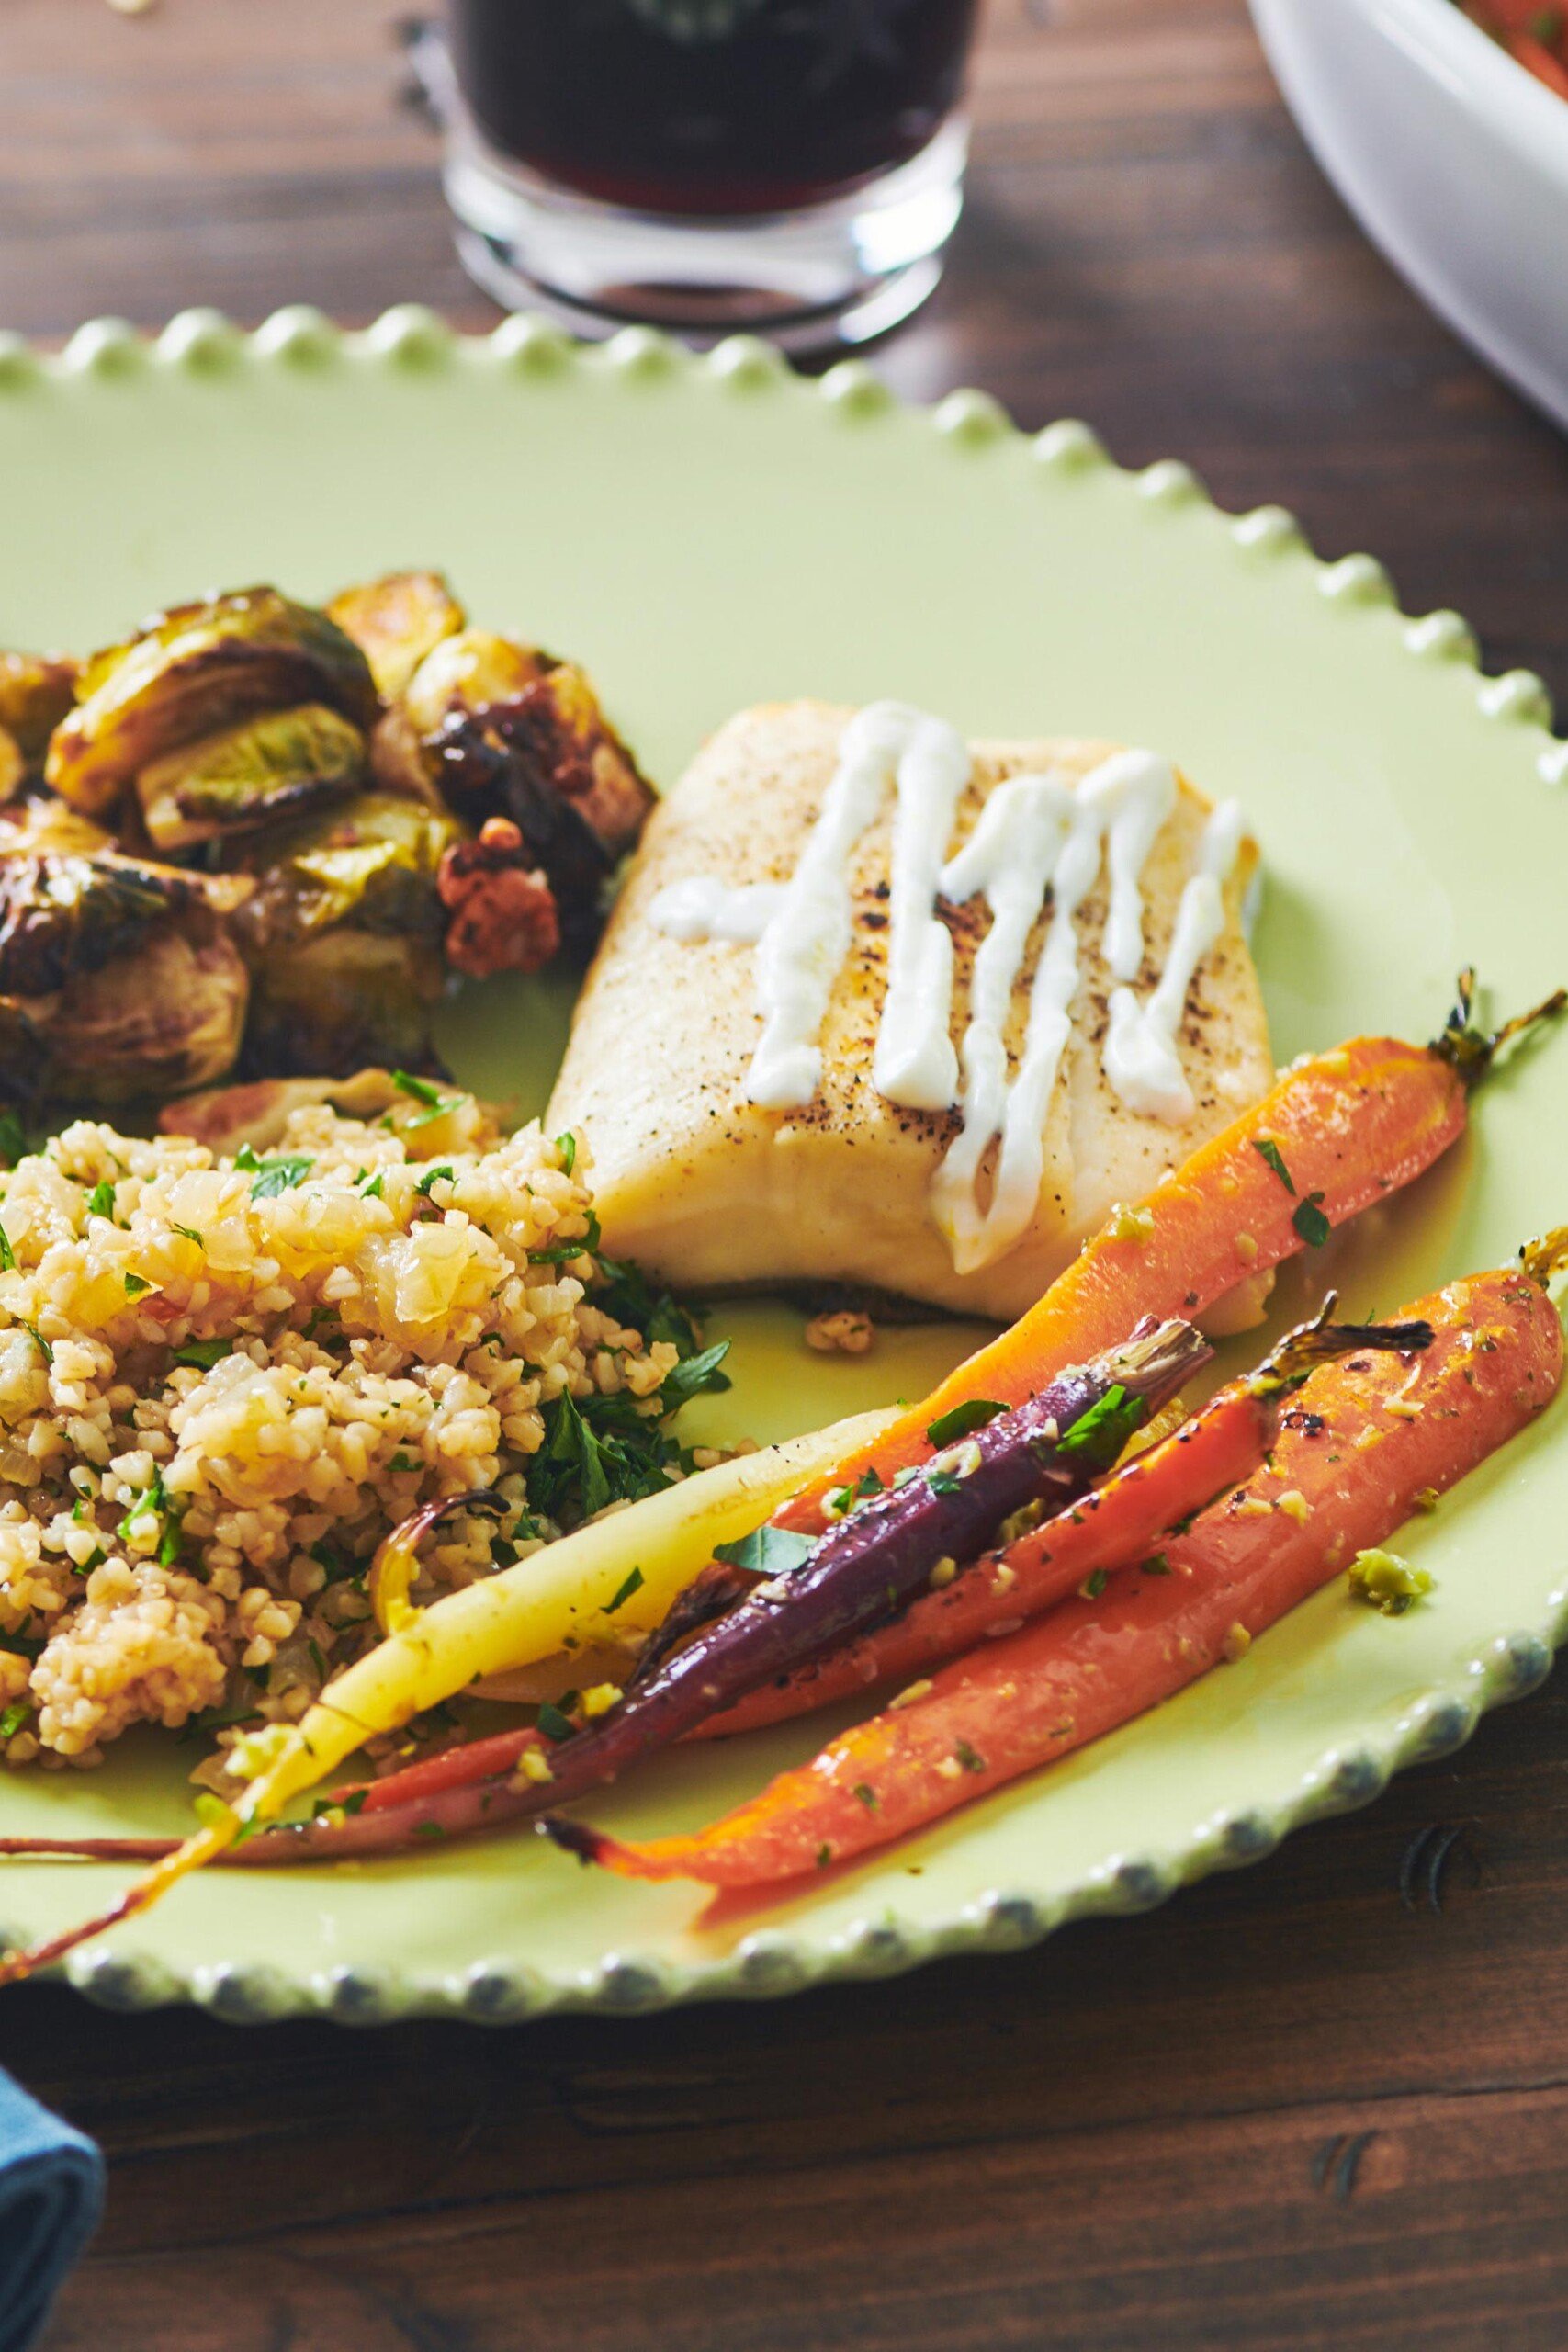 Roasted Cod with Lemon Yogurt Sauce on green plate with Brussels sprouts, carrots, and bulgur wheat salad.